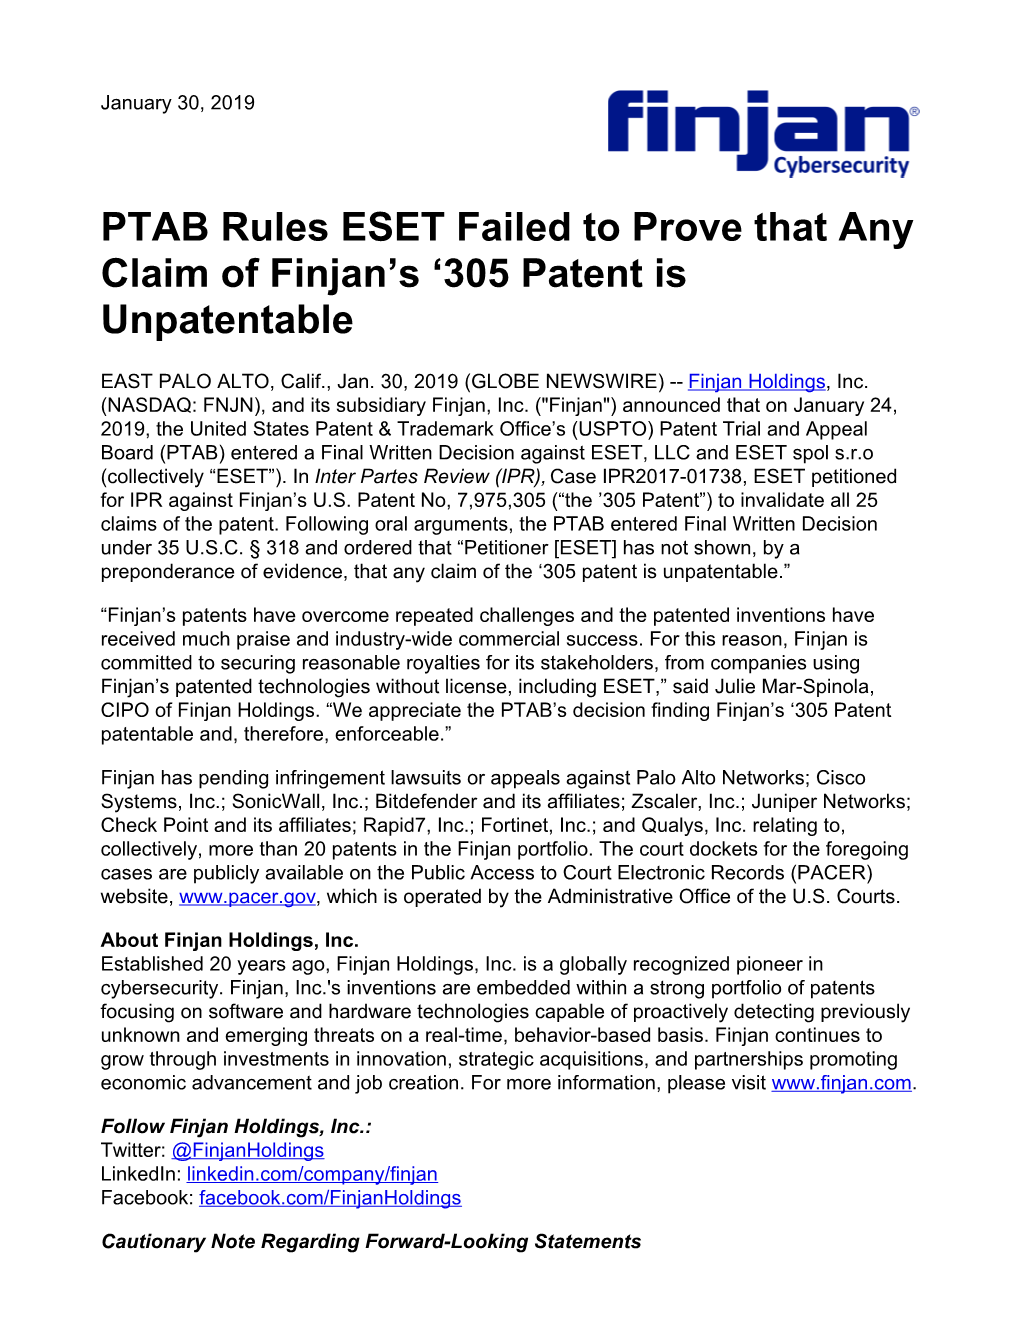 PTAB Rules ESET Failed to Prove That Any Claim of Finjan's